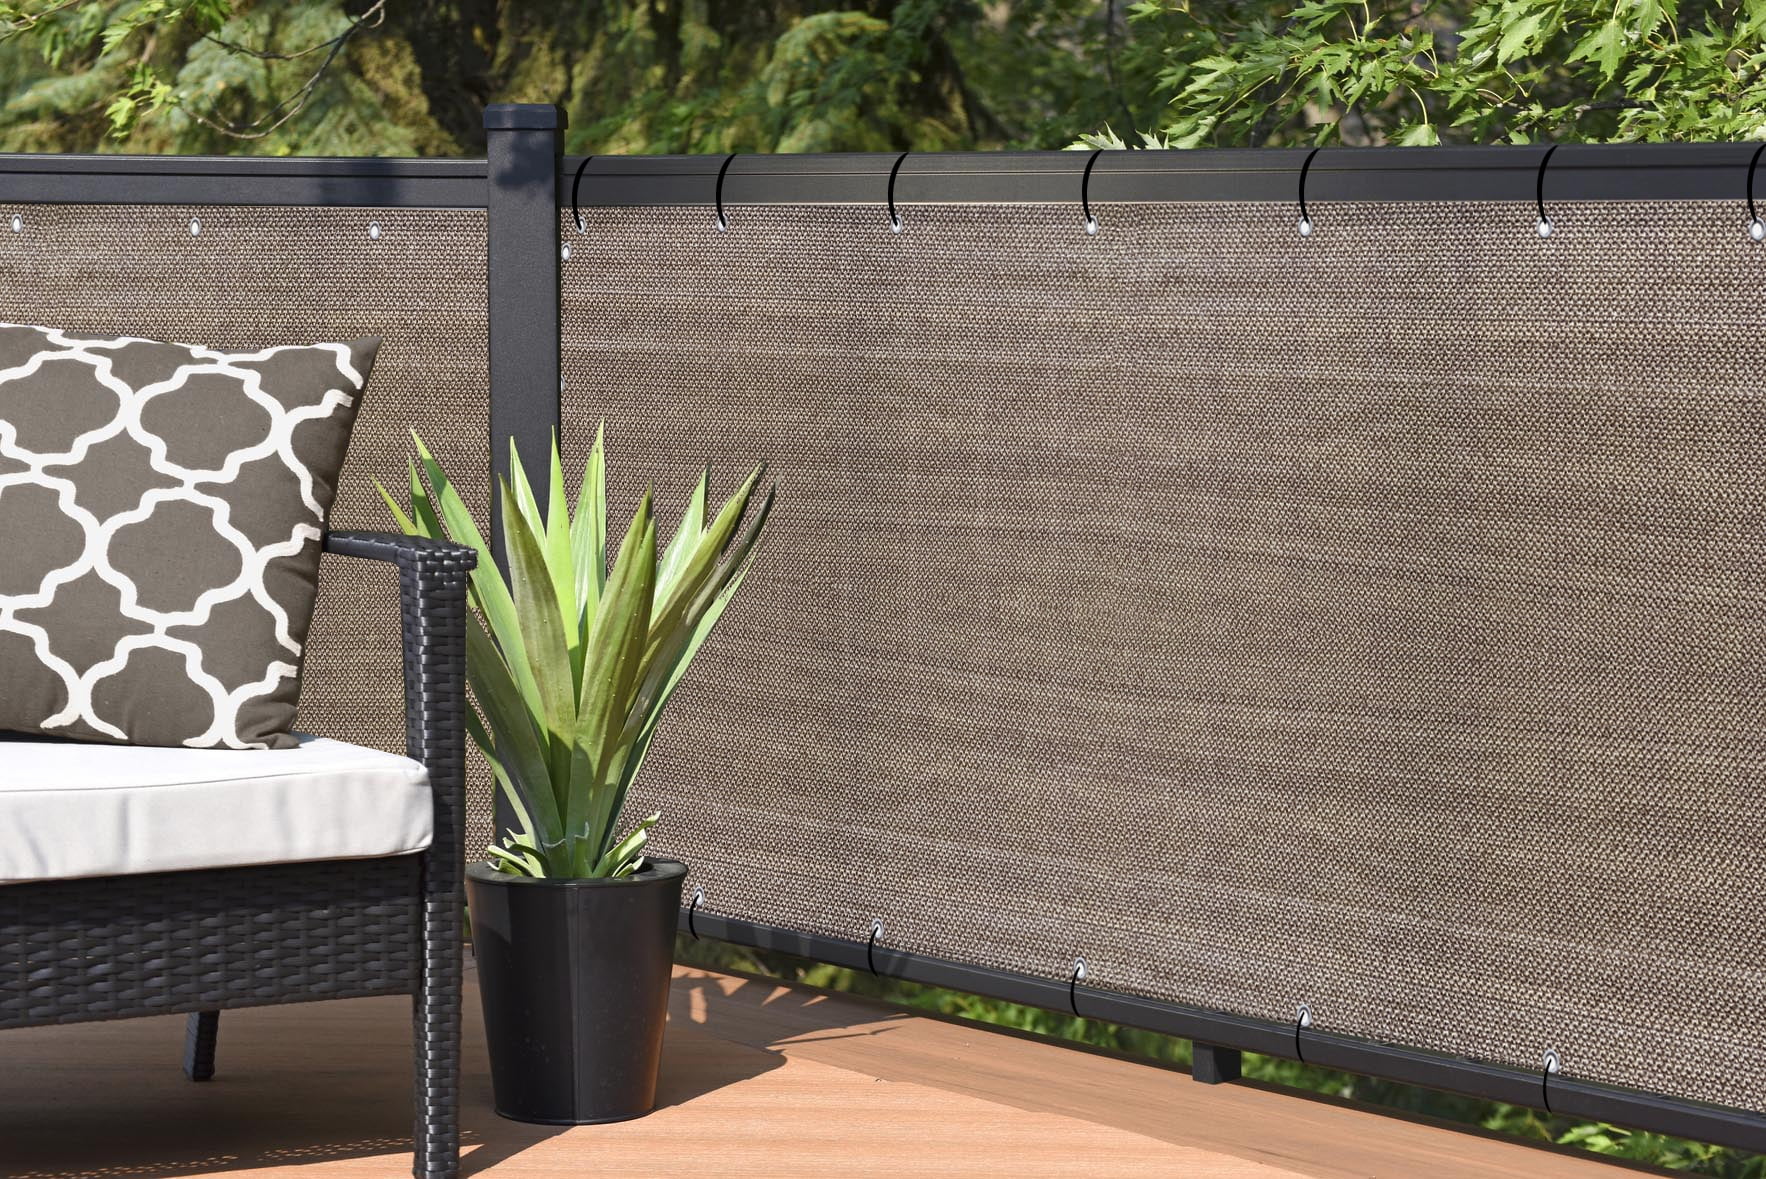 Details about   Privacy Screen for Backyard Deck Patio Balcony Fence Porch Sun Shade Dust Proof 